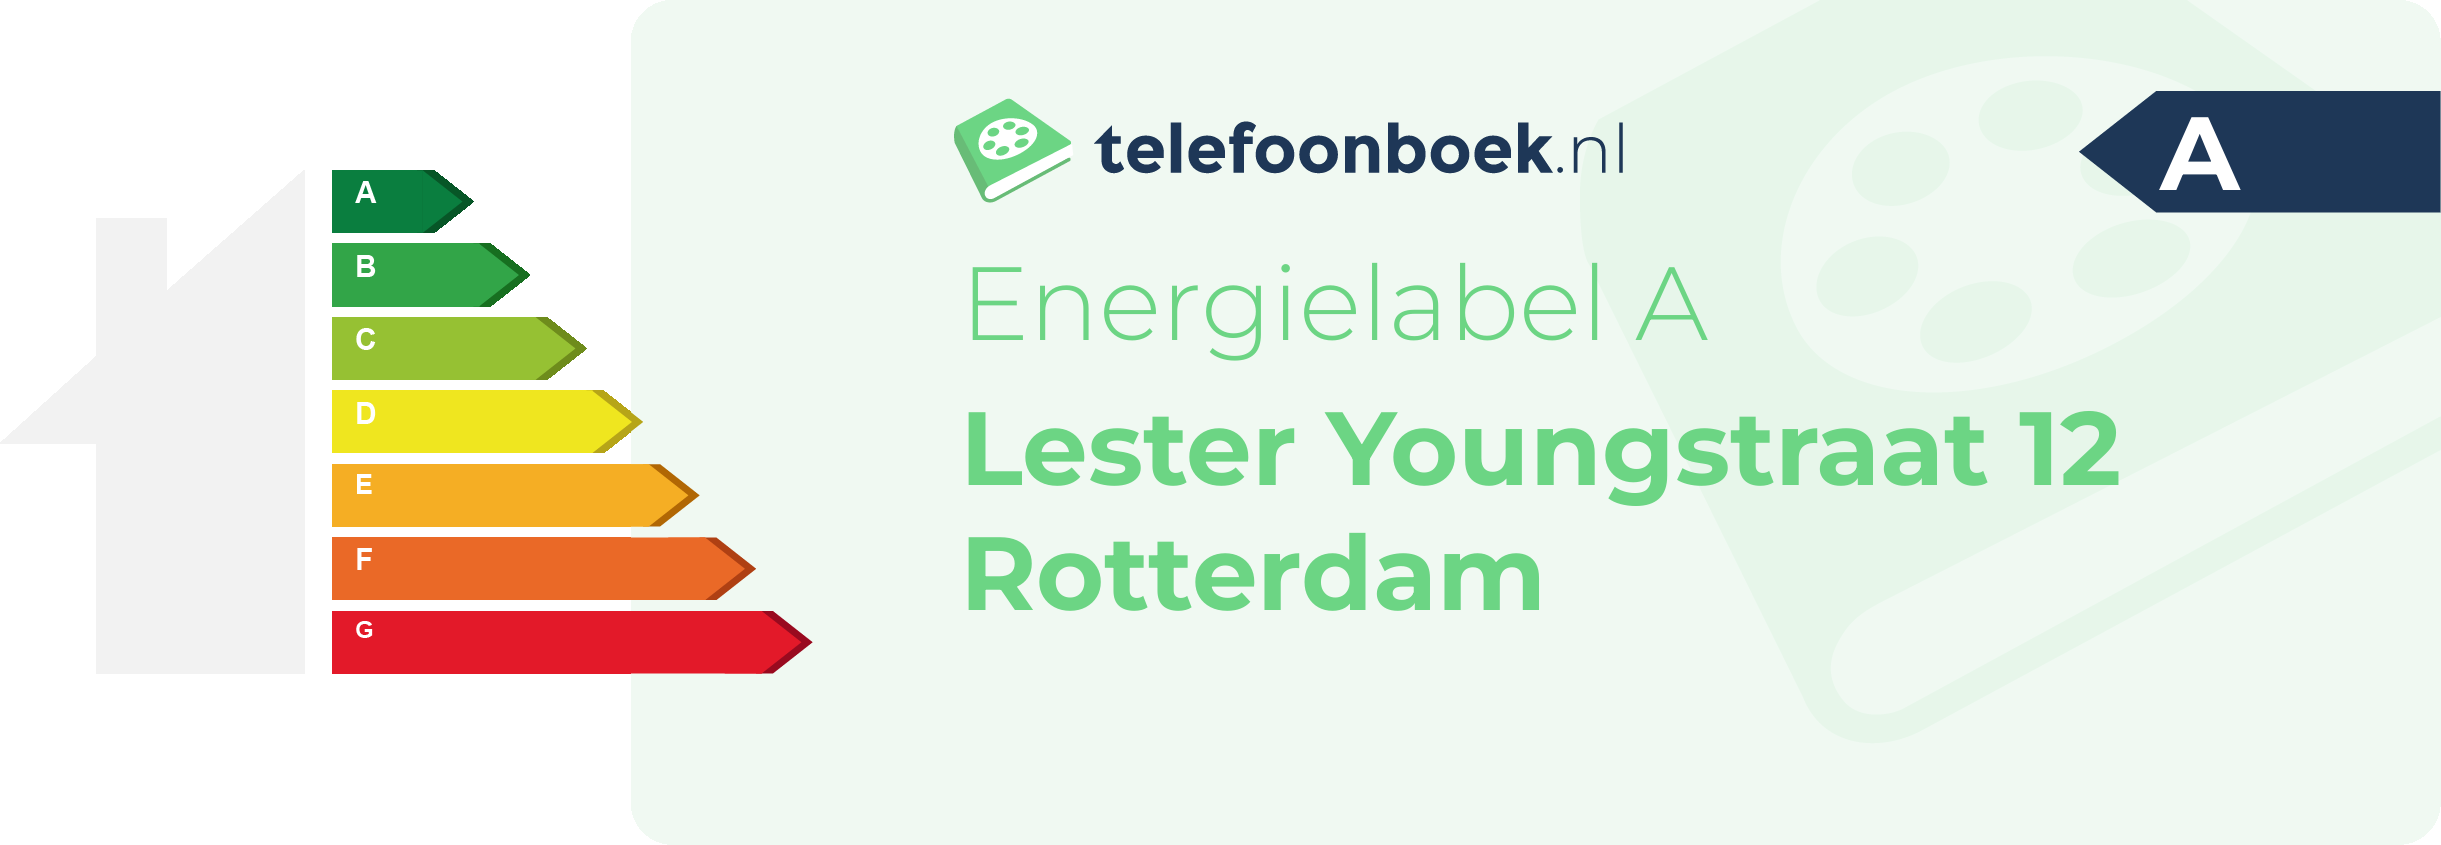 Energielabel Lester Youngstraat 12 Rotterdam